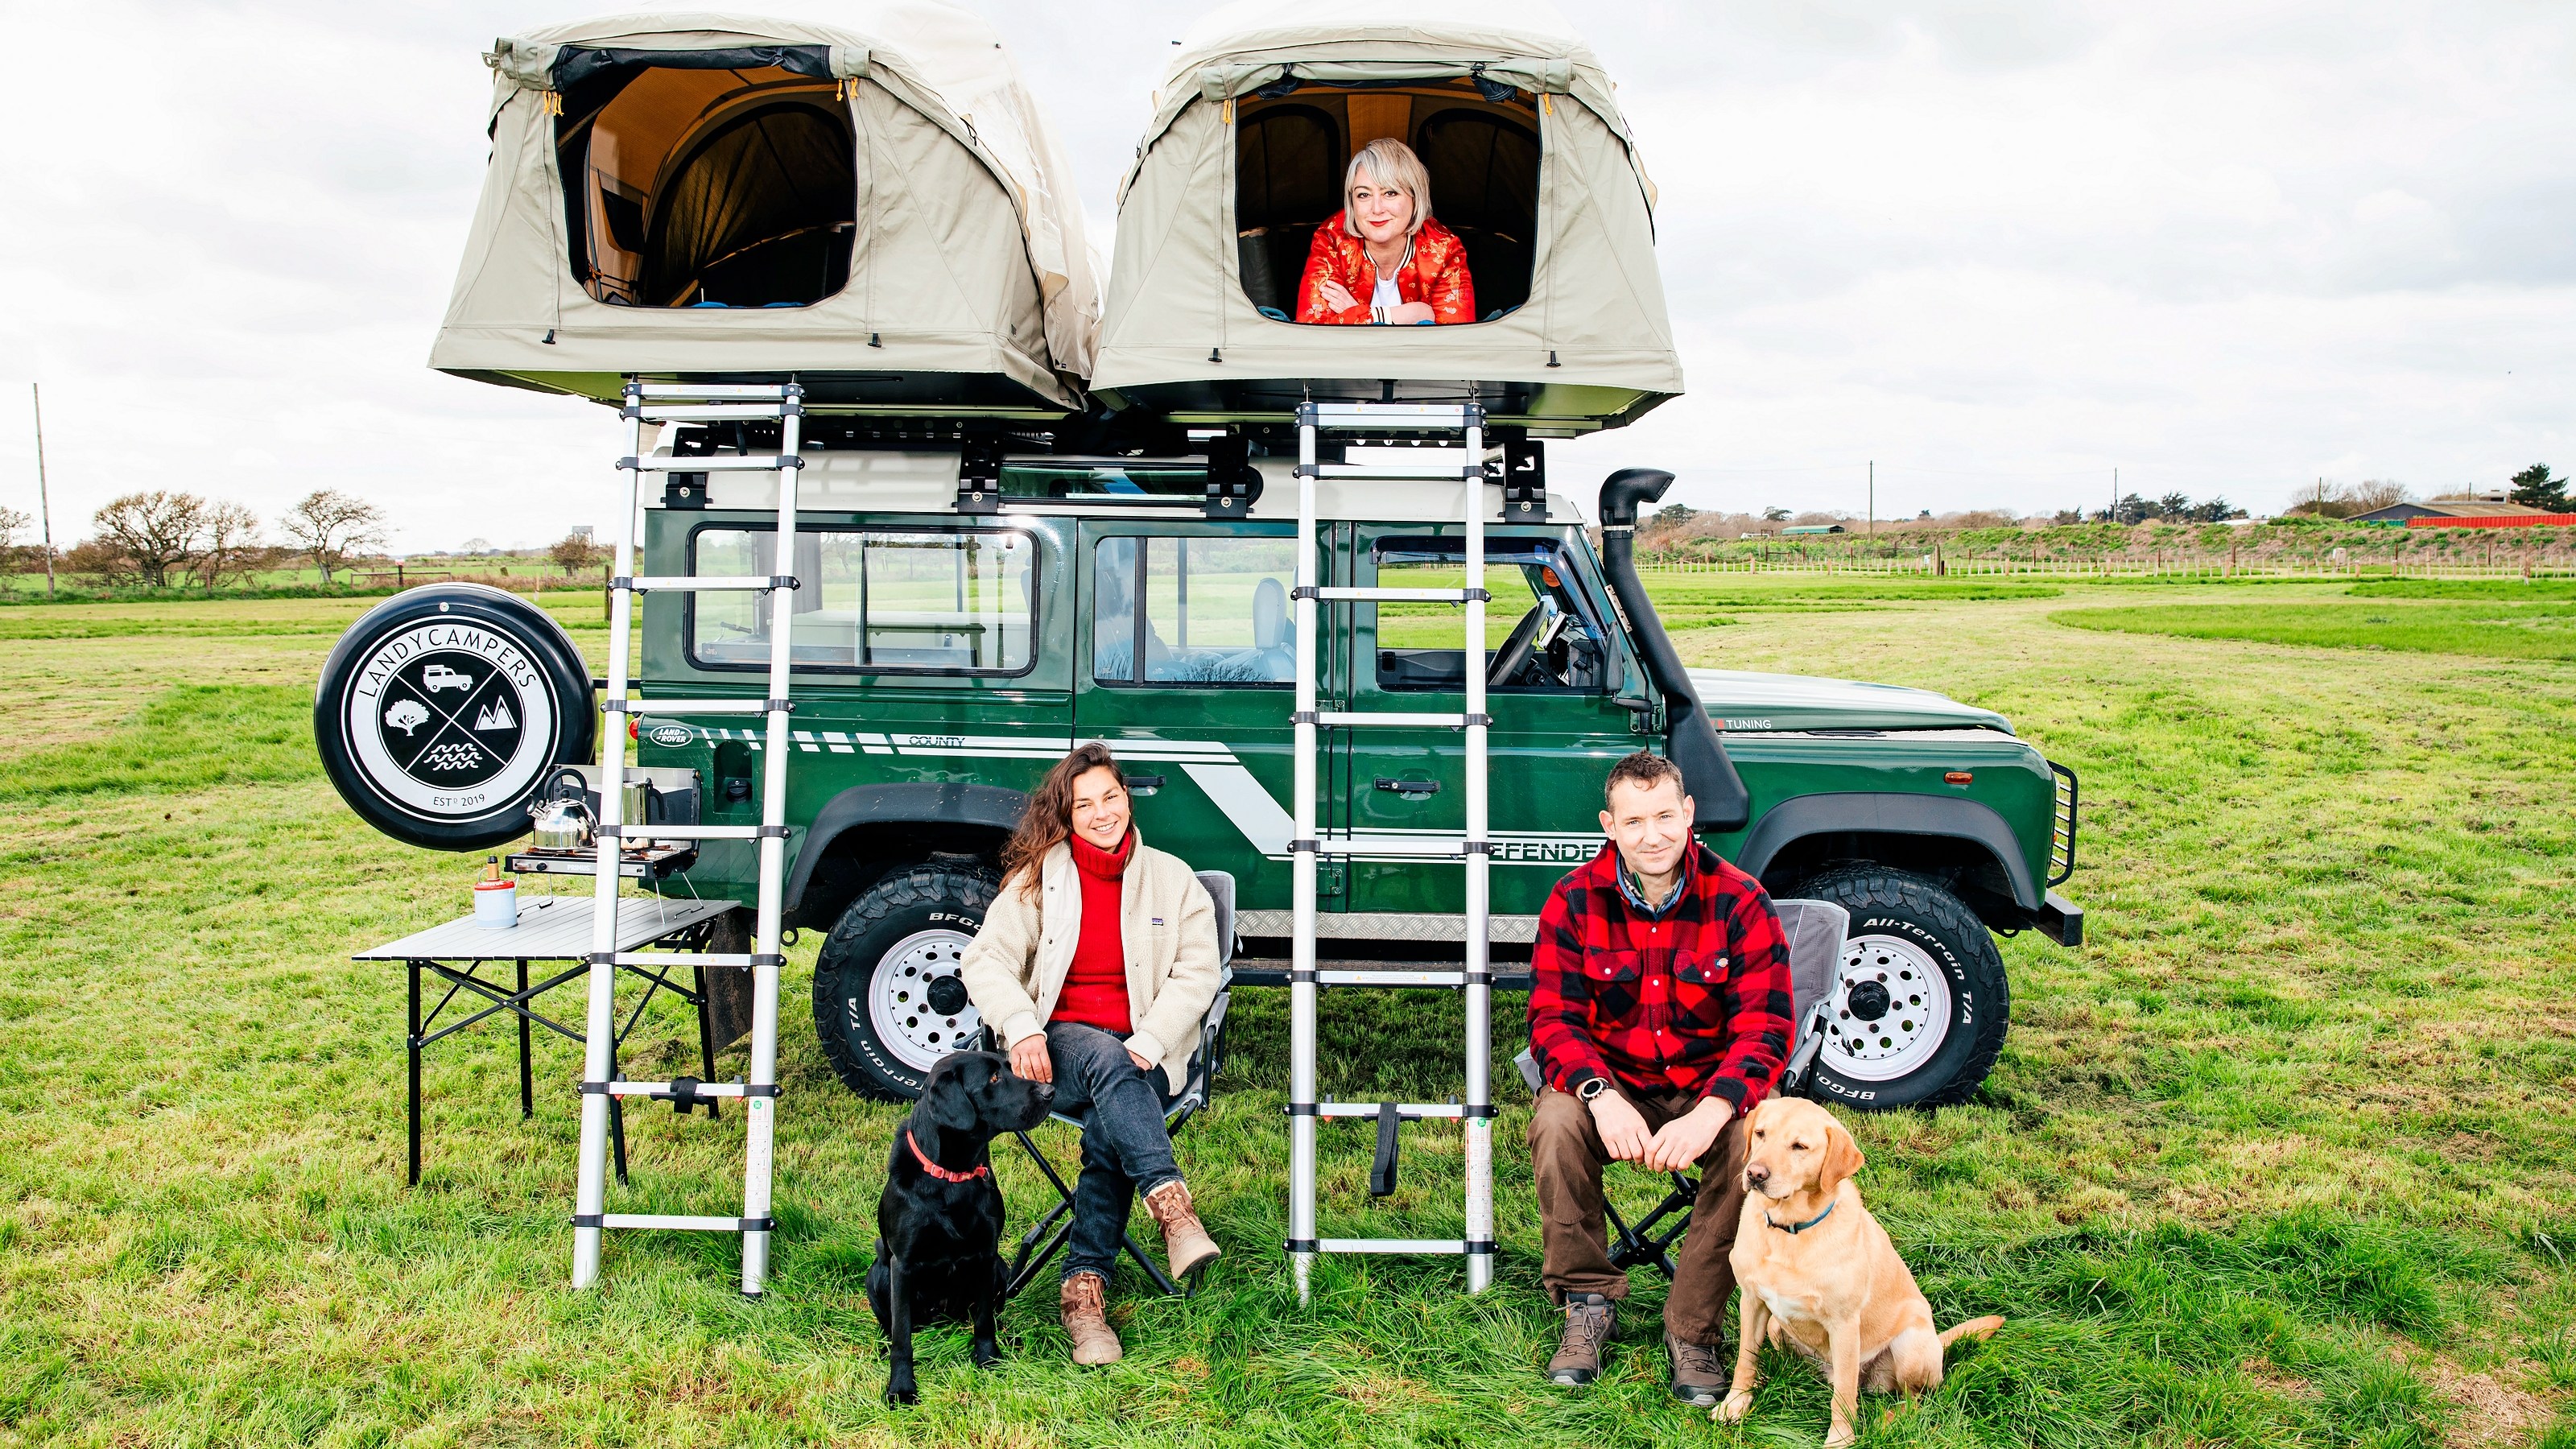 Jane Mulkerrins, Rebecca and Ed Owen, and their dogs Rosco and Bo, camping in Suffolk in a converted Land Rover